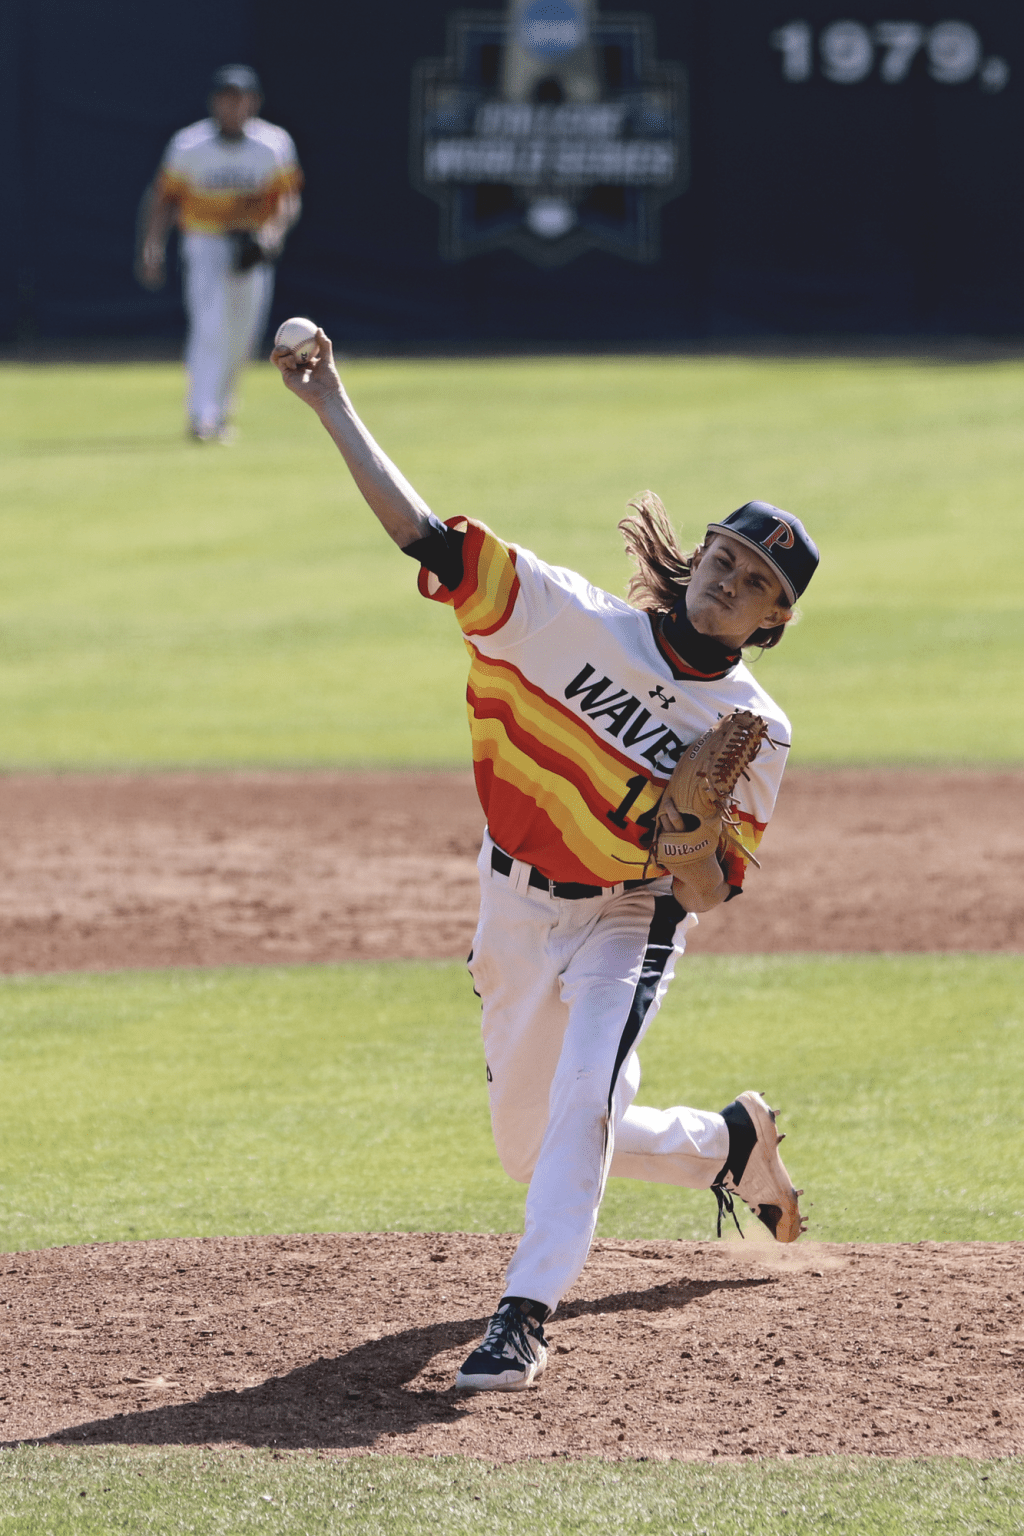 Freshman right-hander Brandon Llewellyn lunges off the mound for a pitch in the third inning against the Gauchos. The pitcher allowed 3 hits and 1 unearned run during Sunday's game.